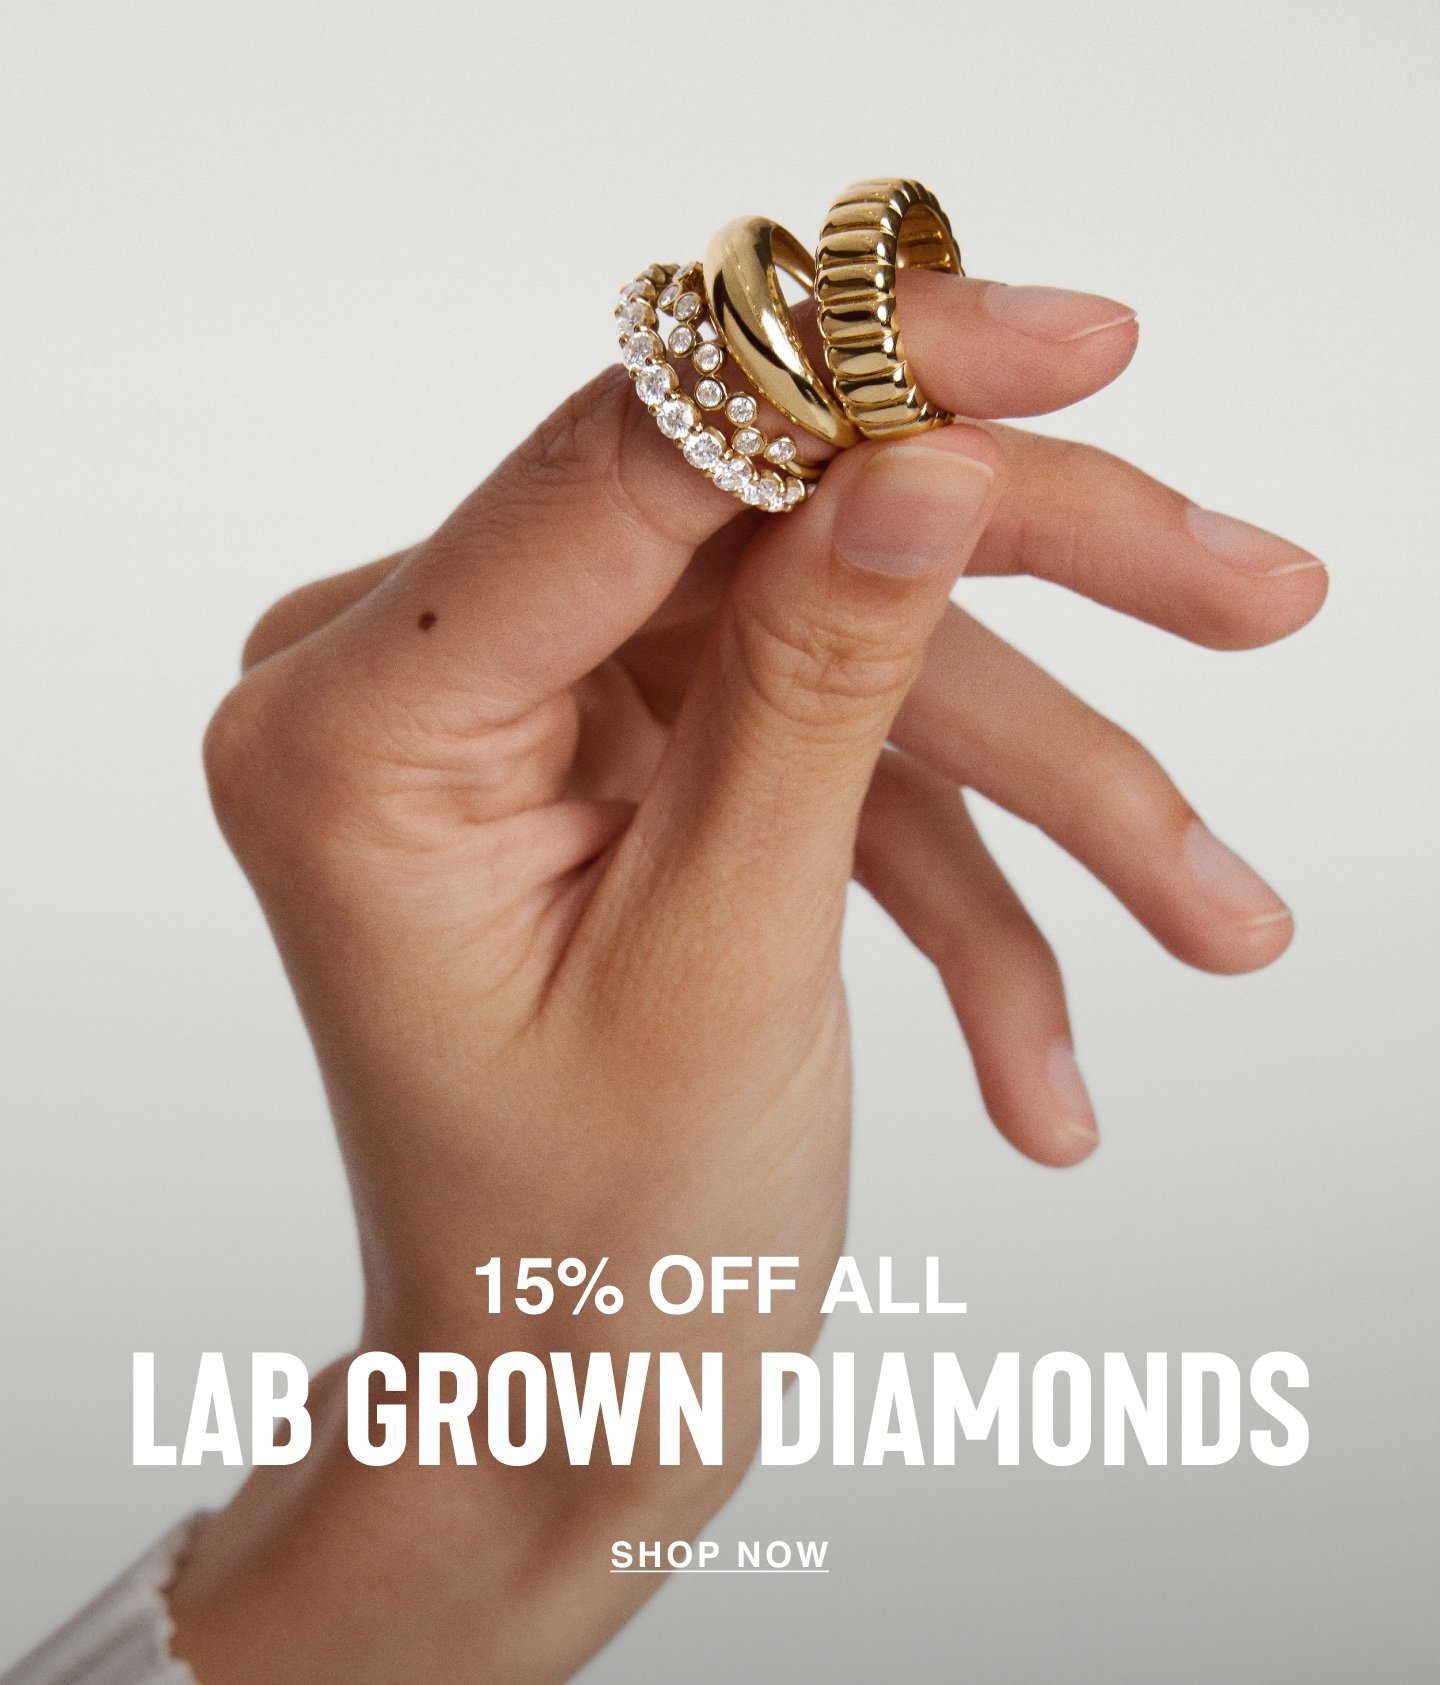 15% Off All Lab Grown Diamonds. Shop Now.